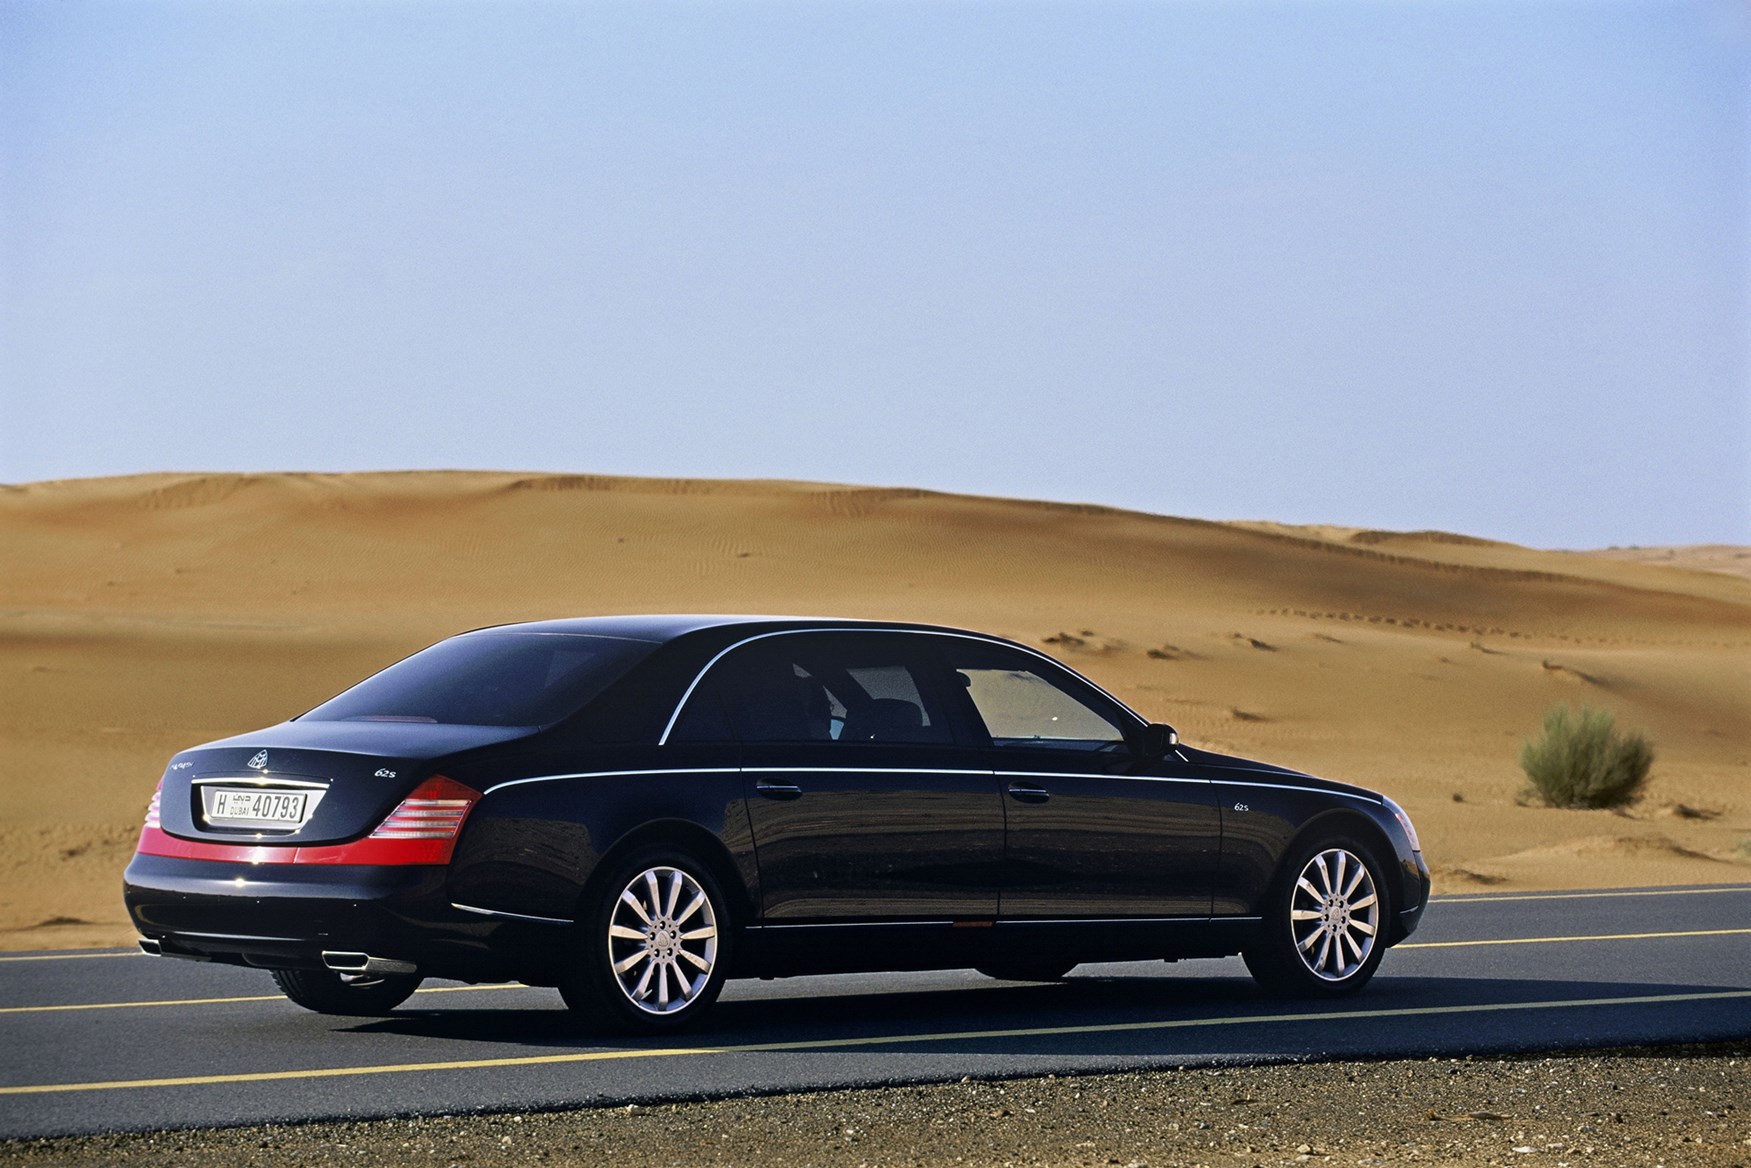 Fichiers Tuning Haute Qualité Maybach 62 62 S  612hp